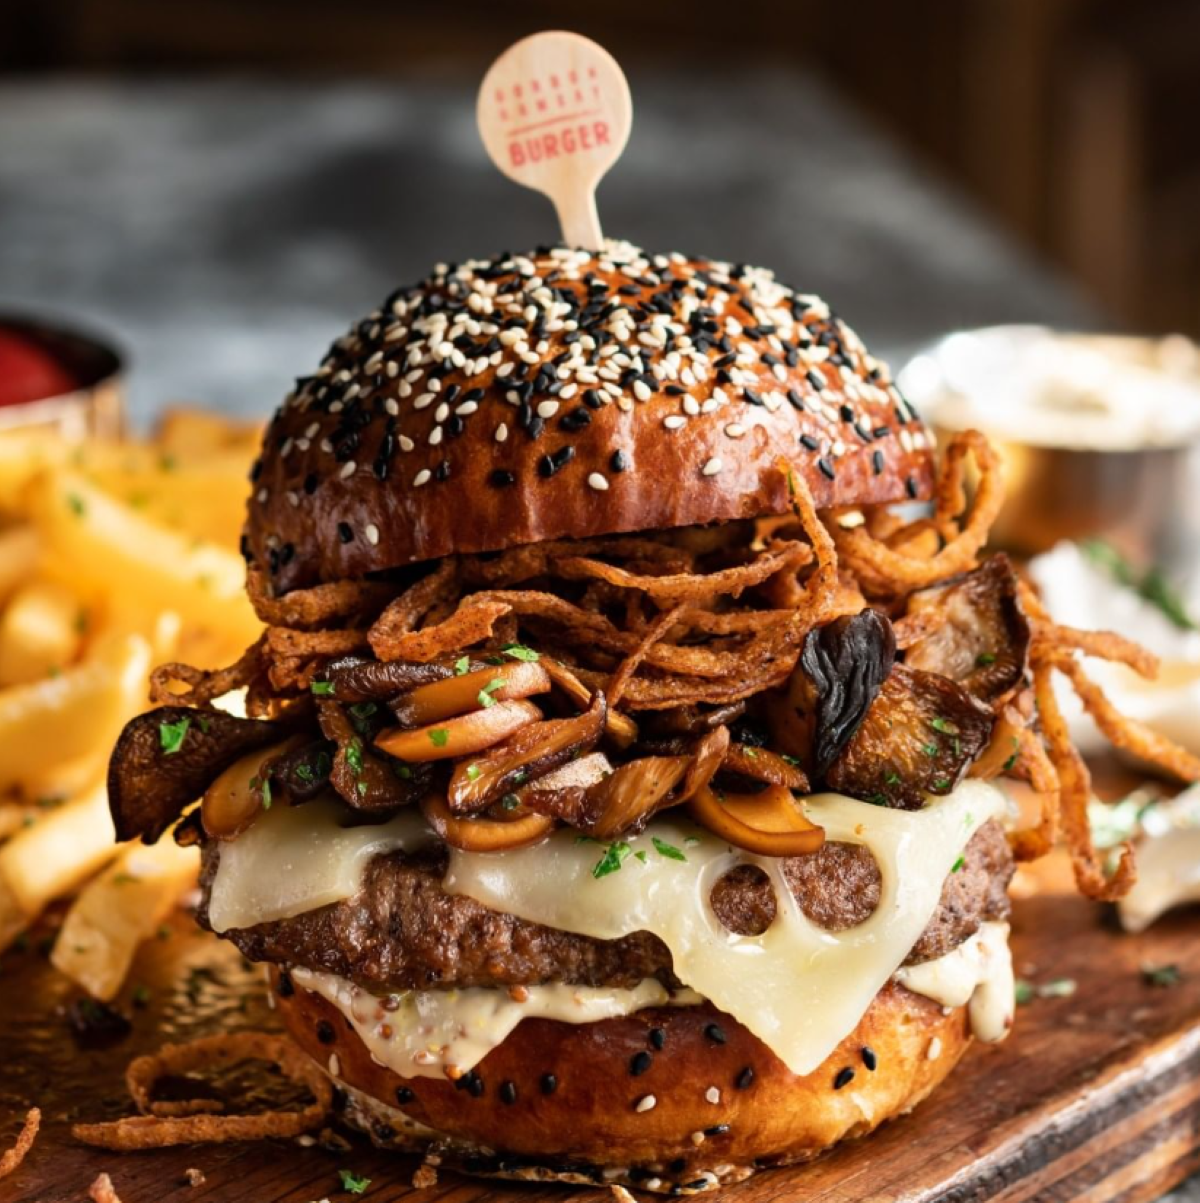 Gordon Ramsay Burger Will Soon Be Opening in the Leather District ...